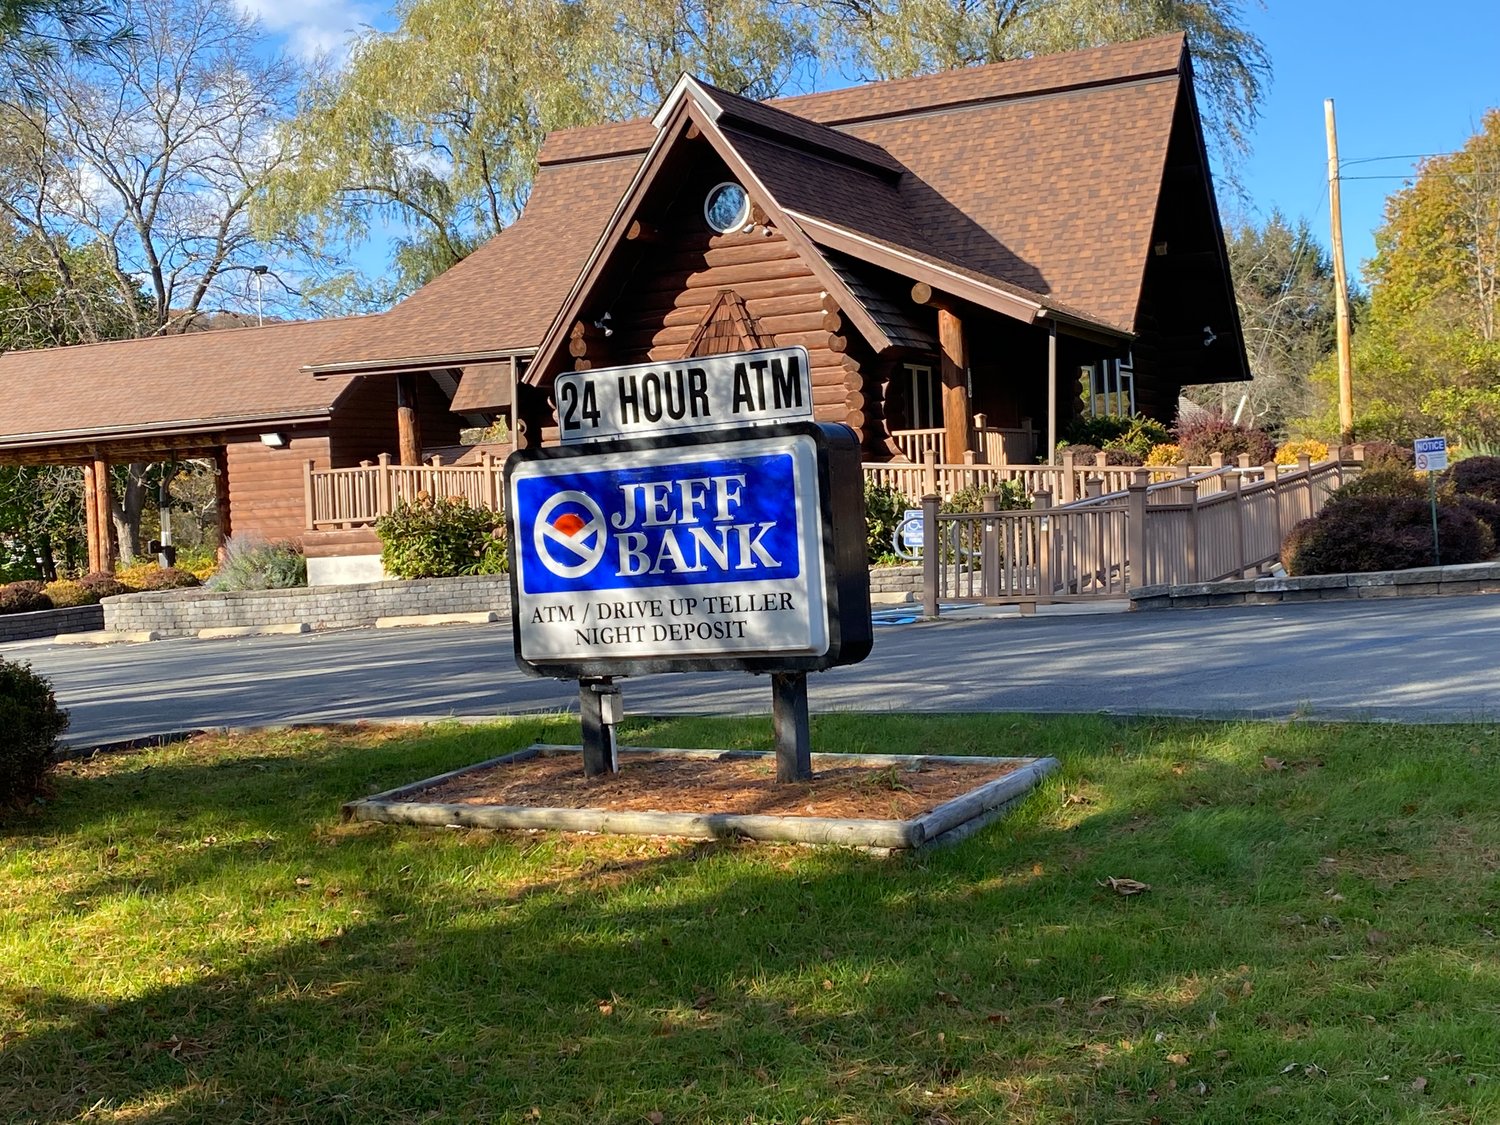 The Narrowsburg branch of the Jeff Bank is scheduled to close in February 2022.